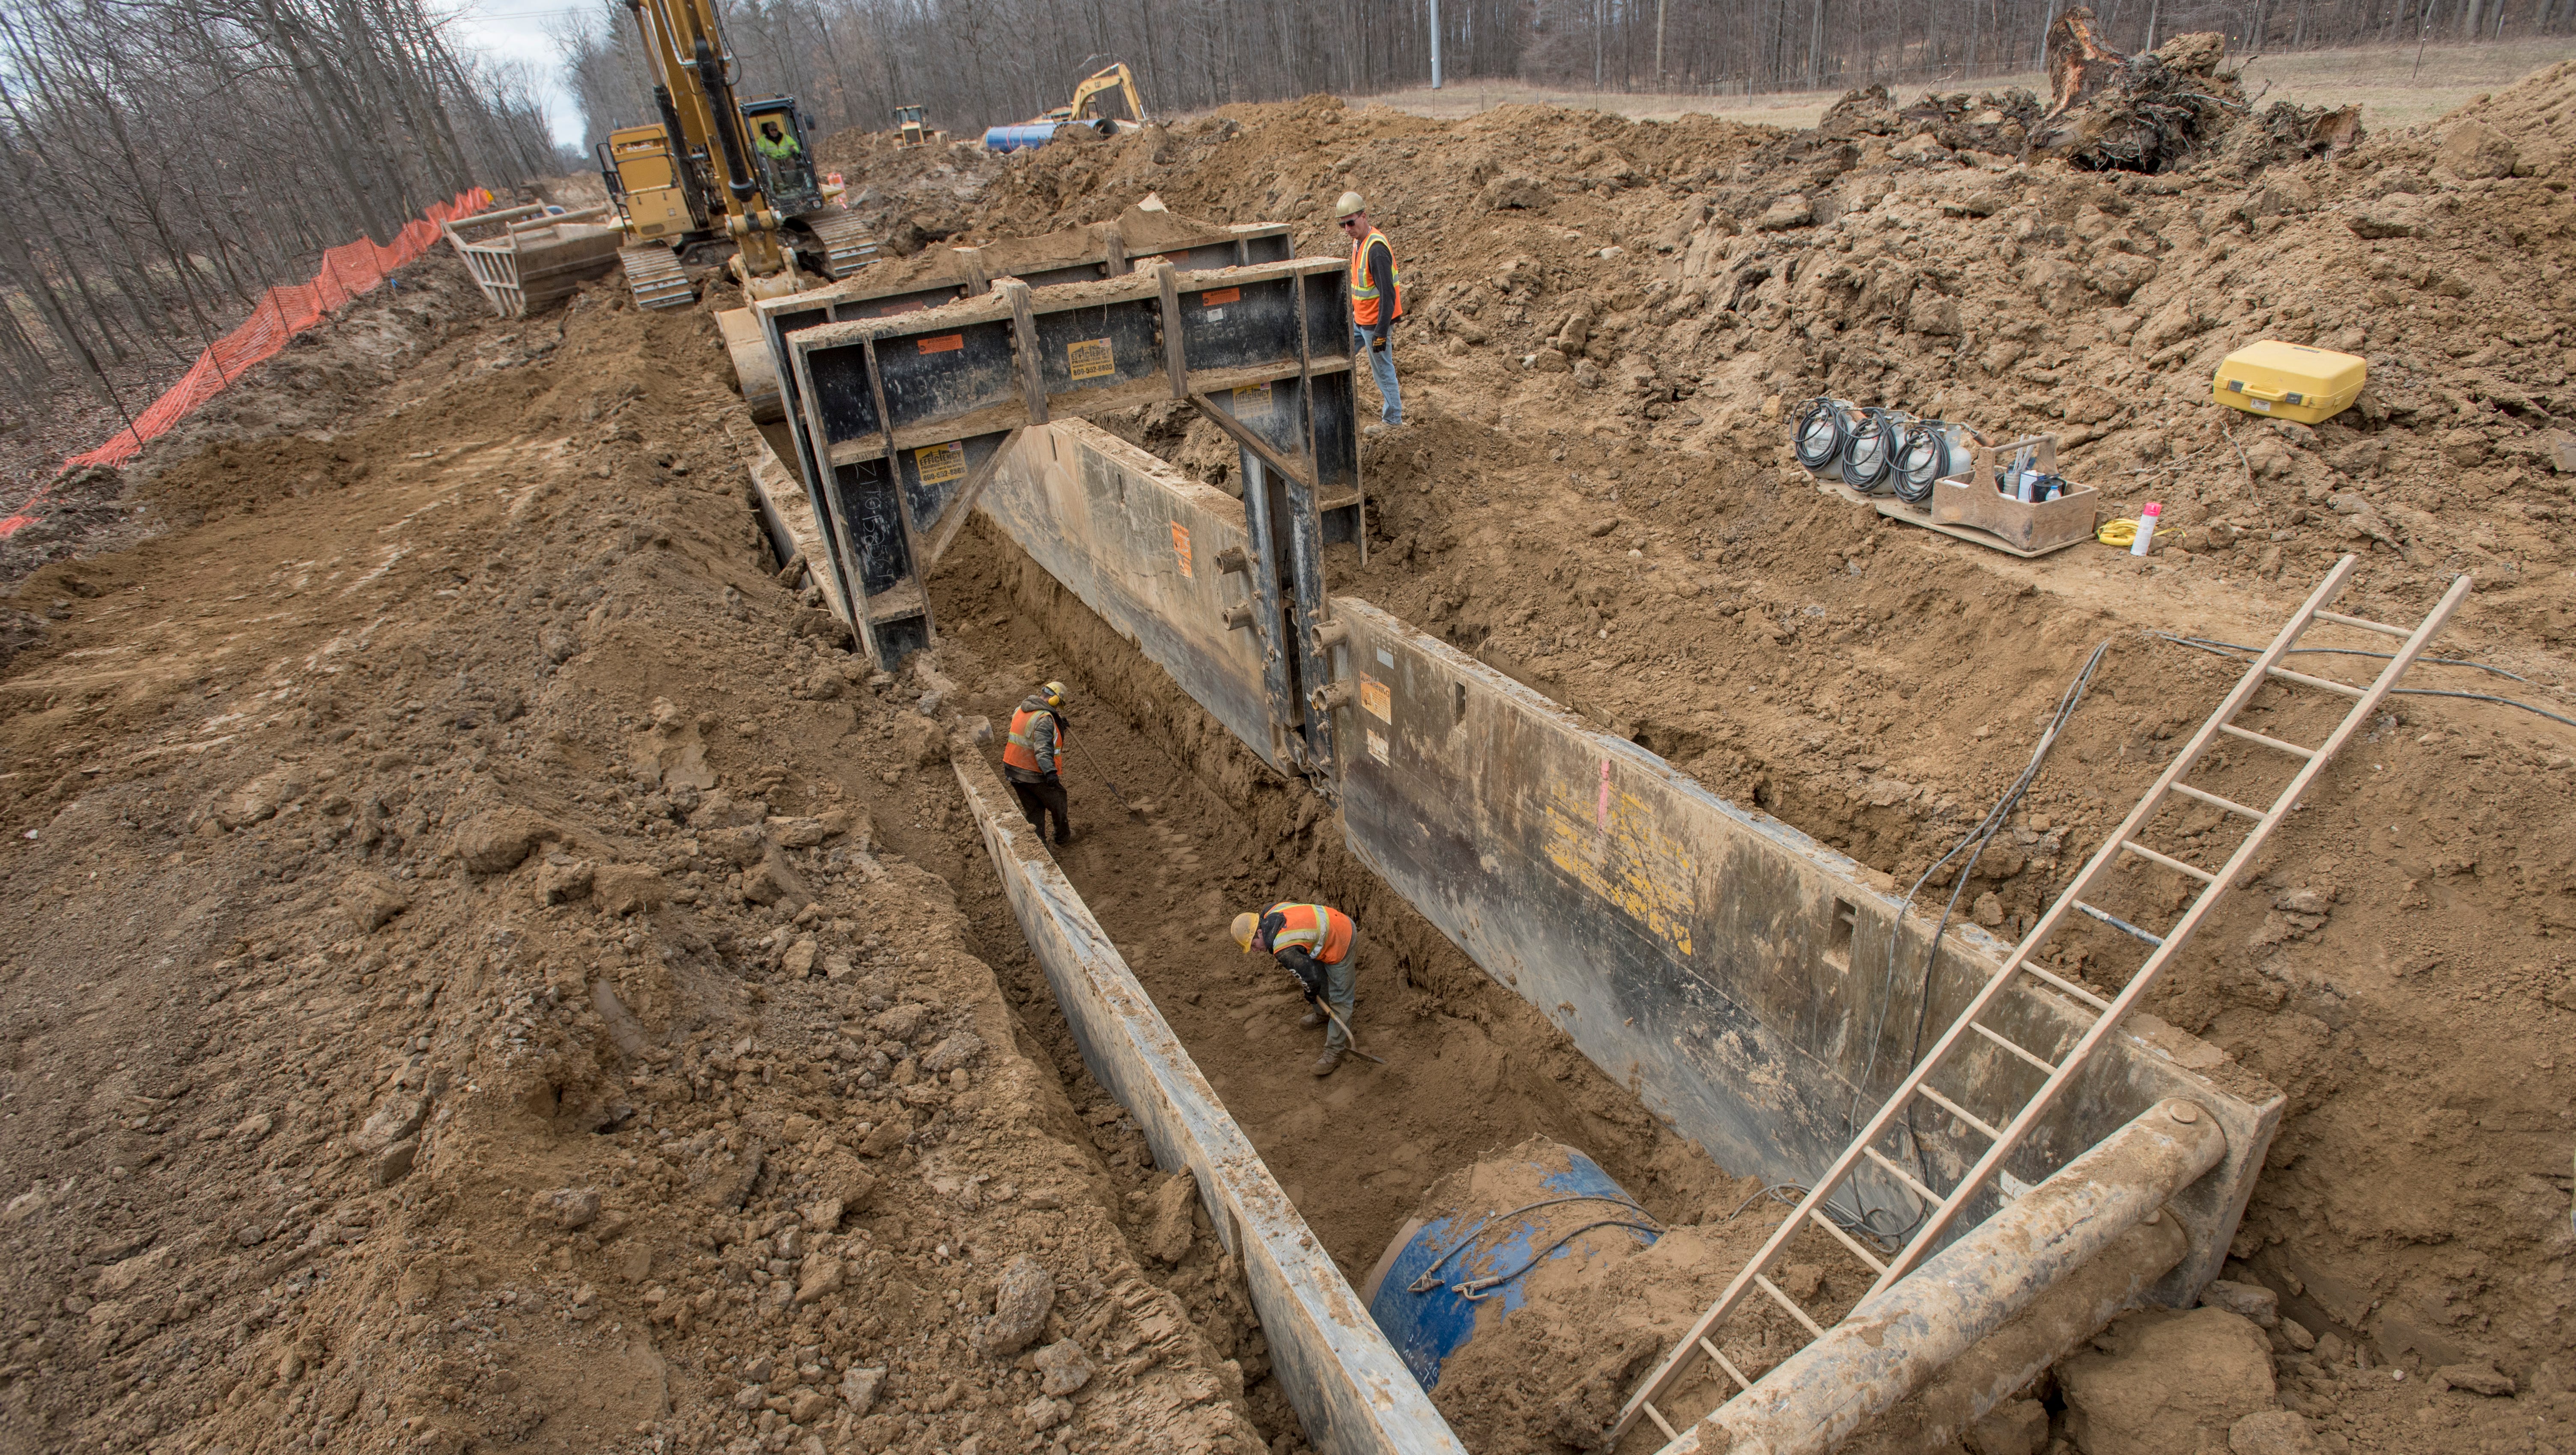 Laborers work in a ditch preparing the ground for a section of the Karegnondi Water Authority pipeline.